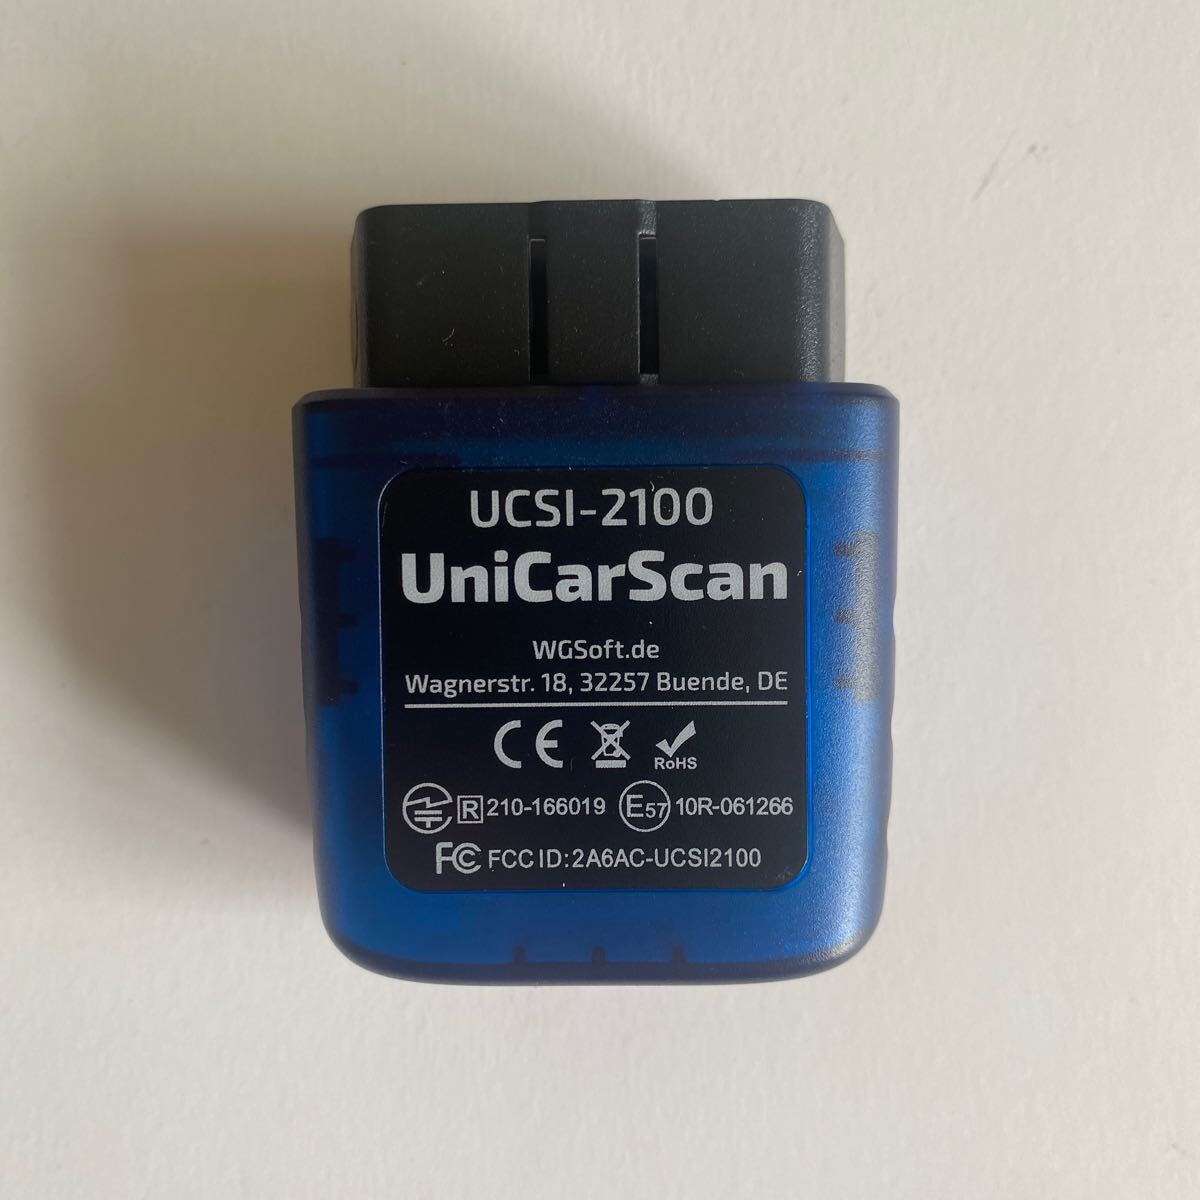 Unicarscan UCSI-2100 OBD2 Adapter For BMW Coding Bimmercode Motoscan_画像3